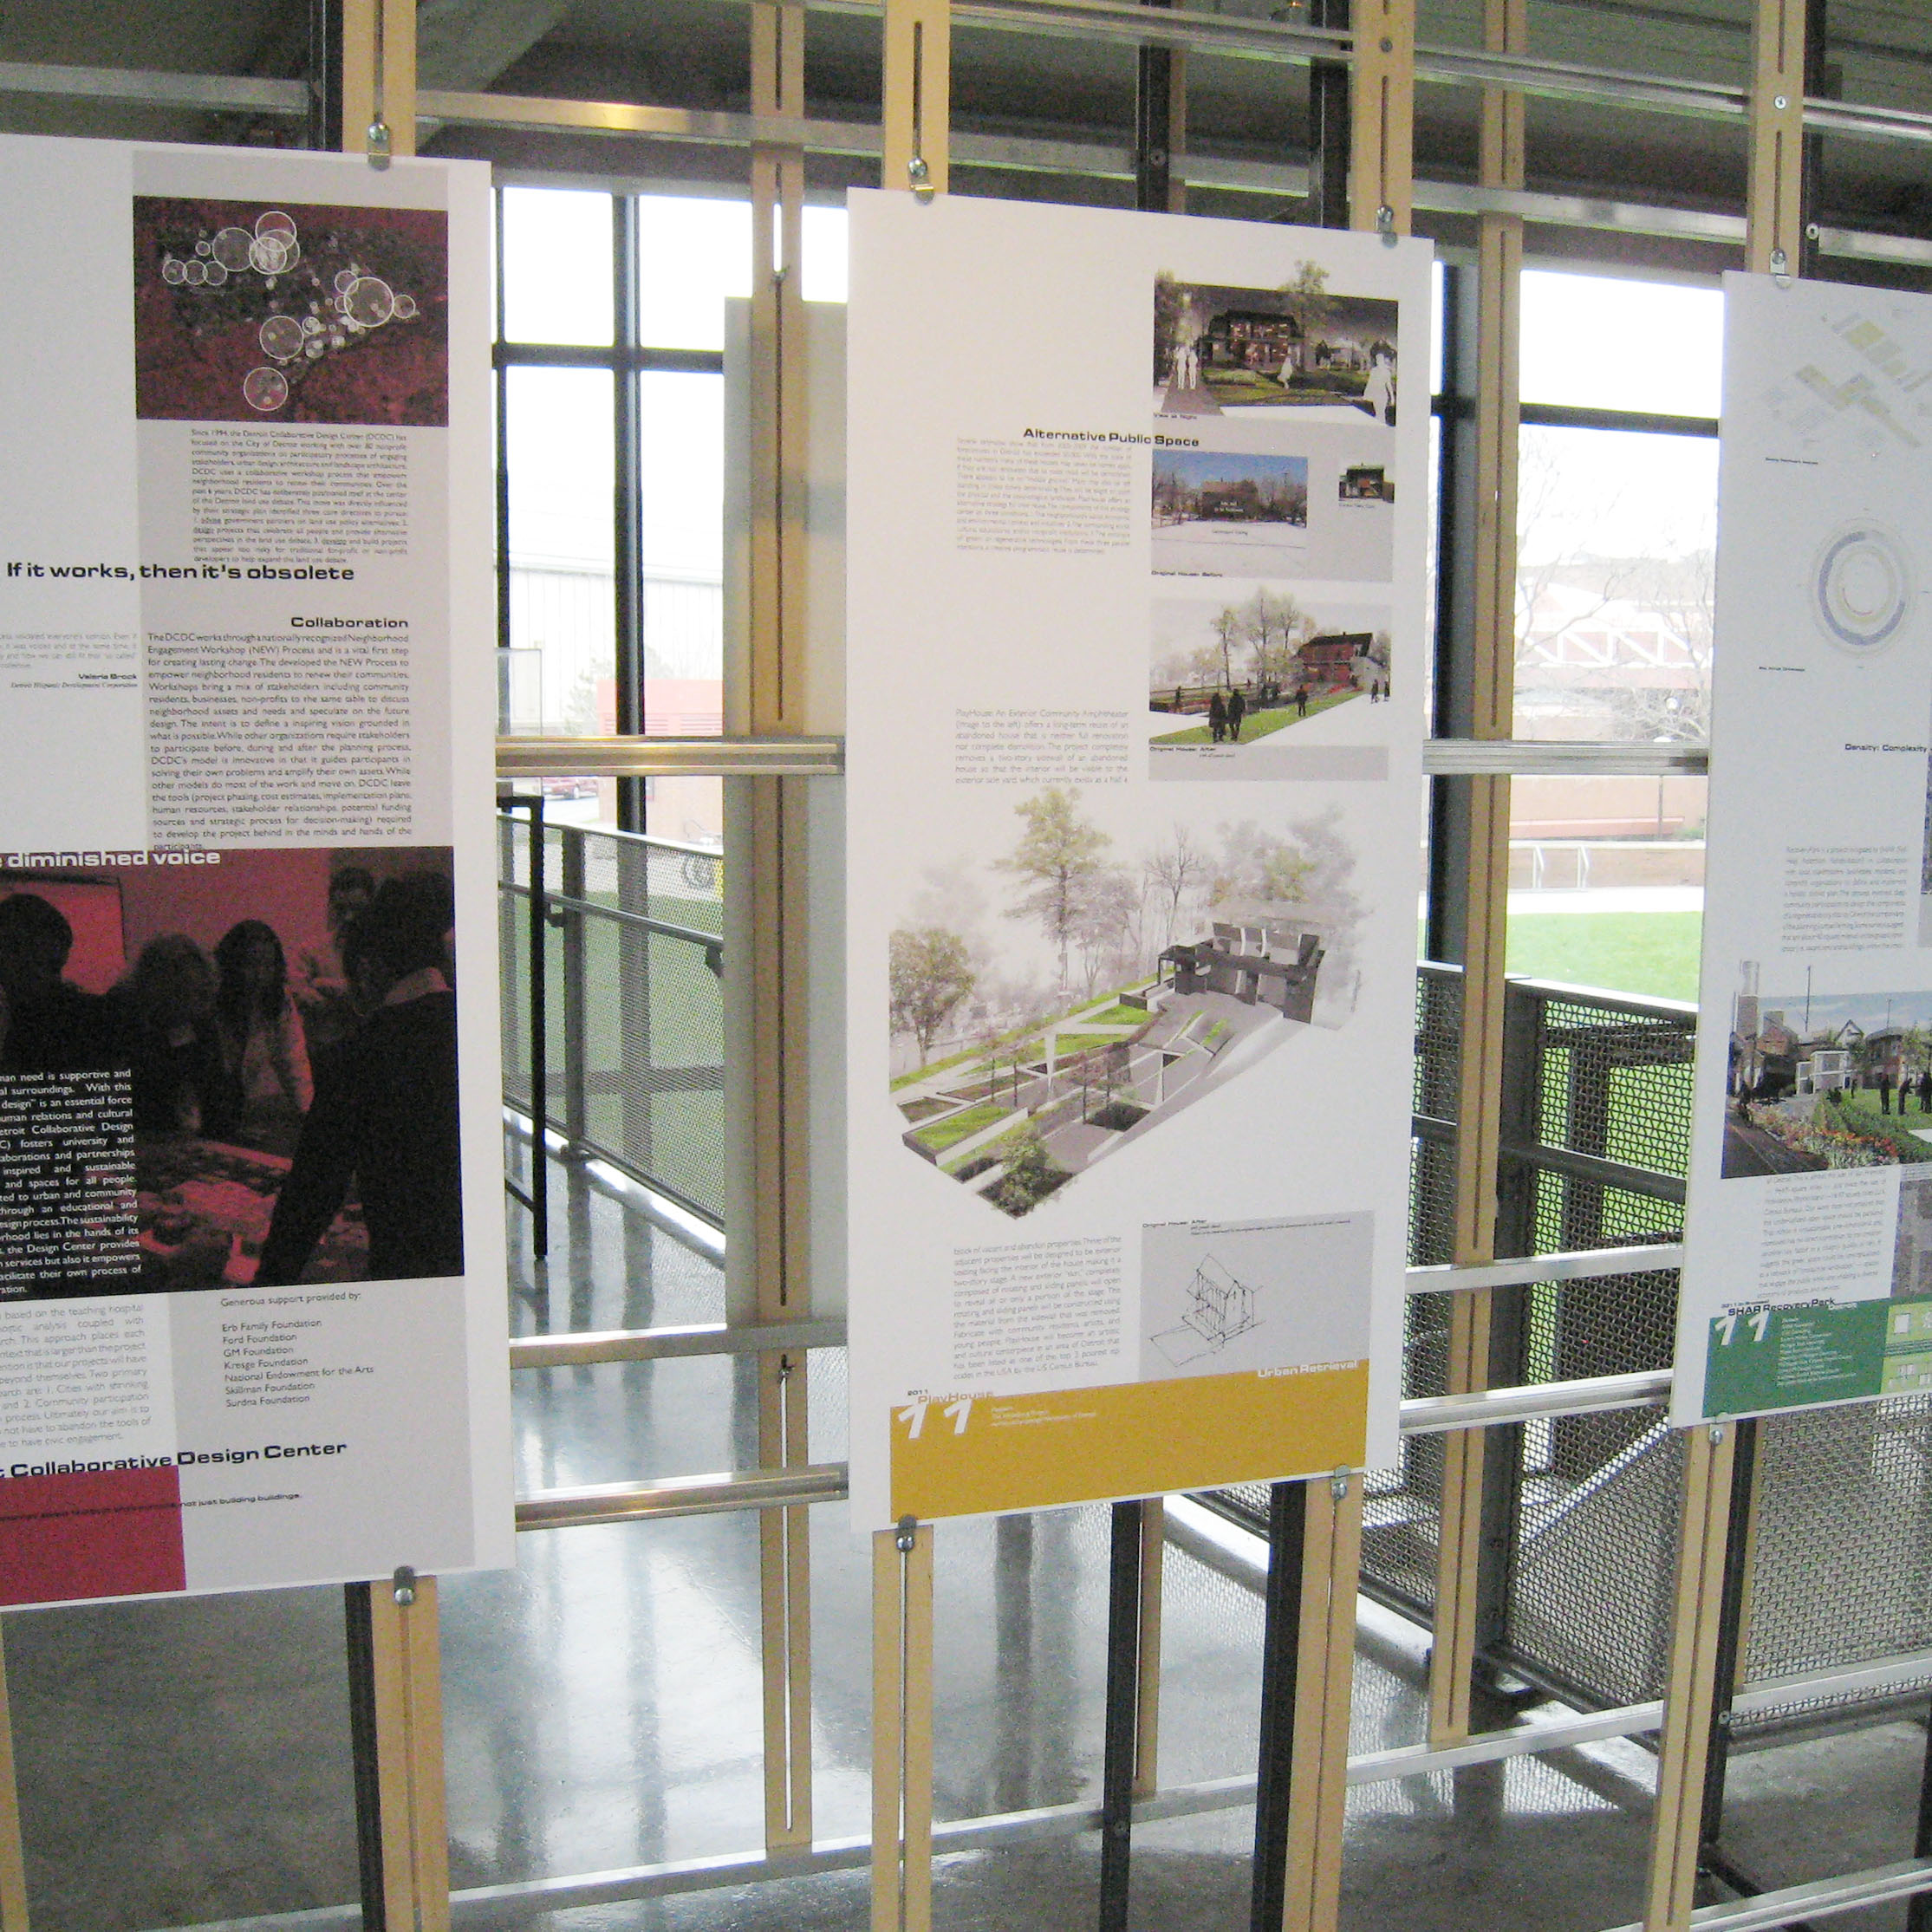 Art, Design and Community Building boards in HGA Gallery